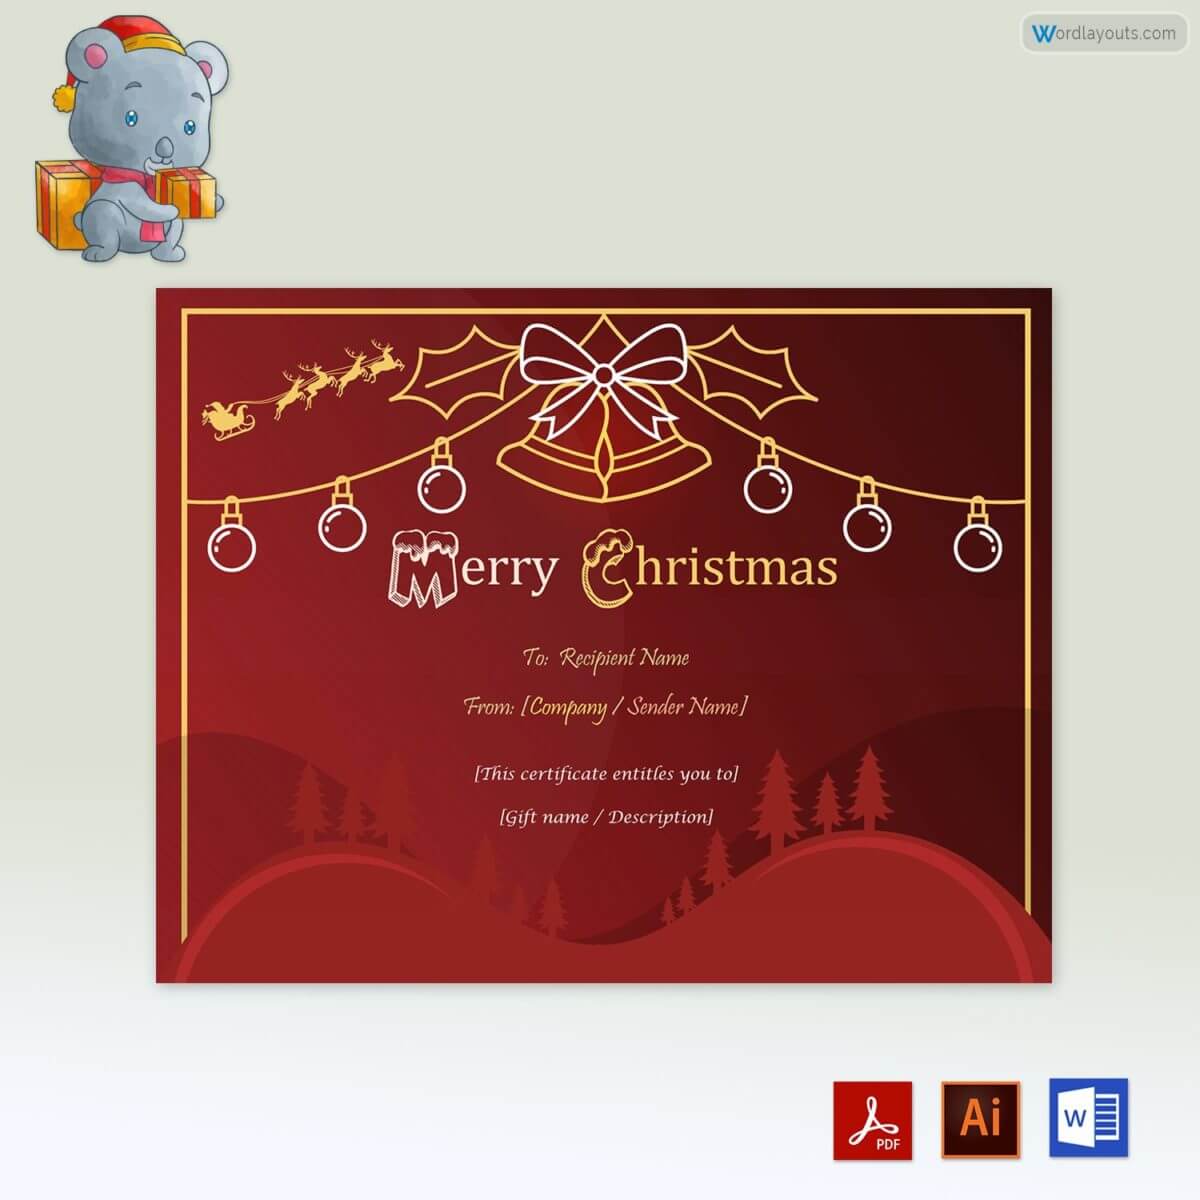 Free Downloadable Christmas Gift Certificate Template 08 for Word, Adobe and AI Format